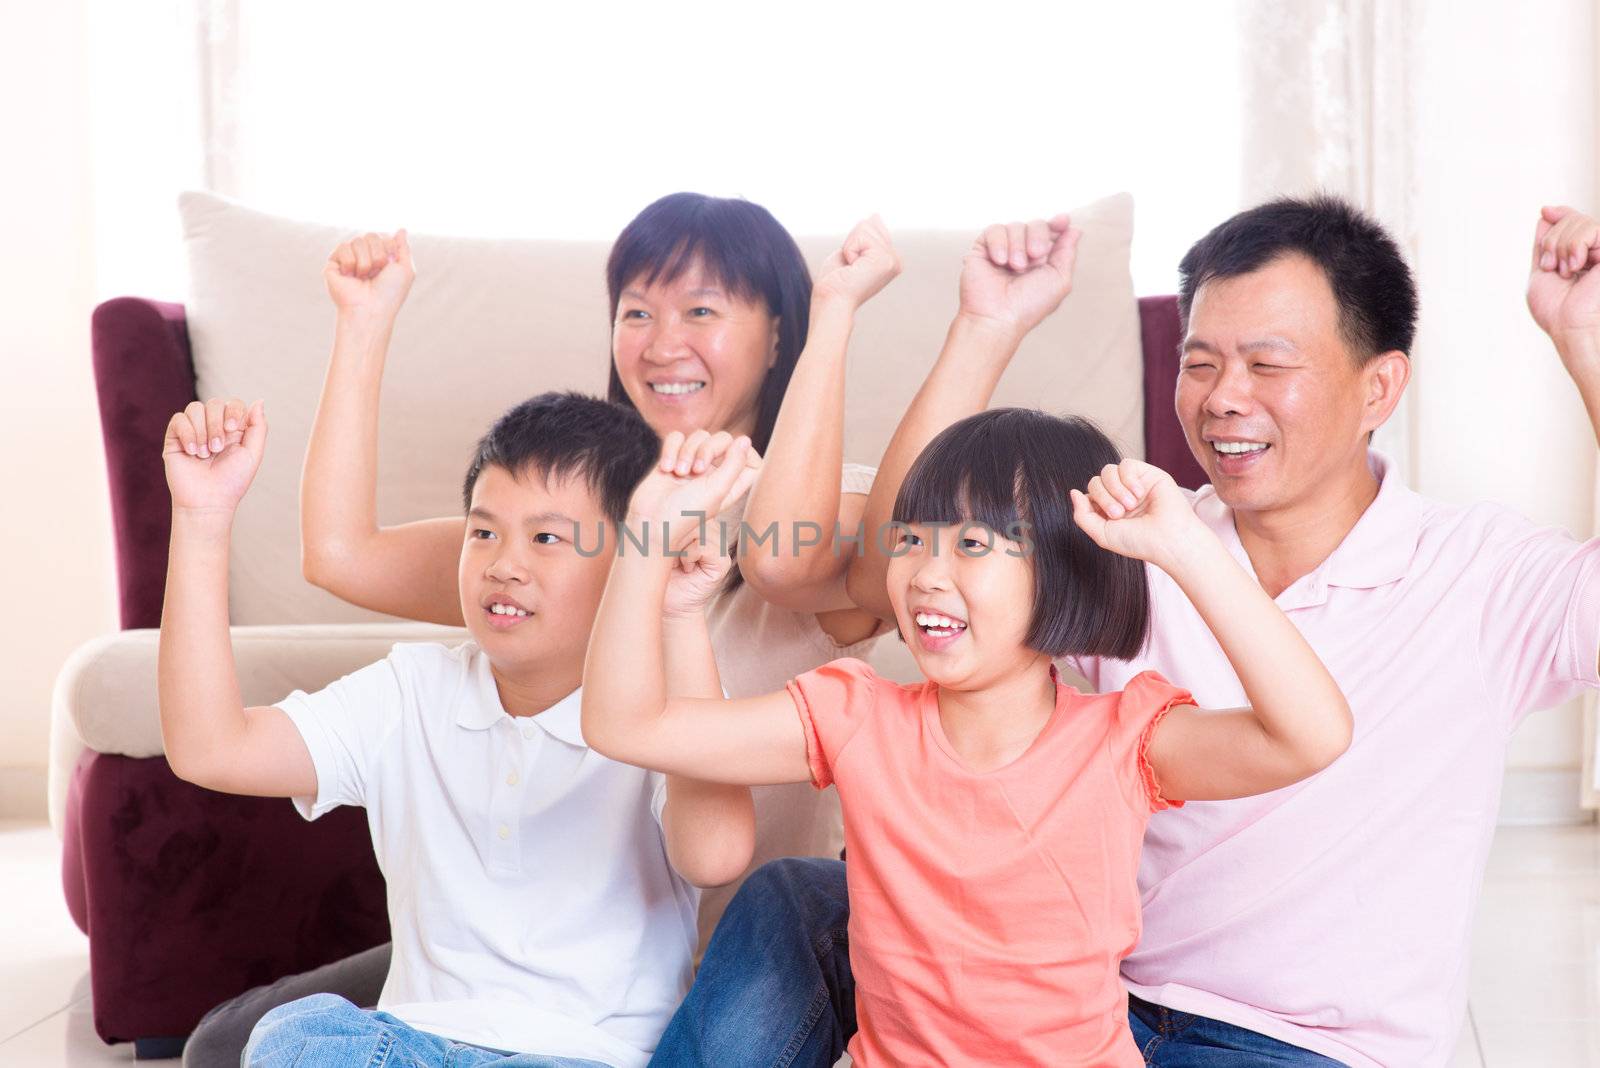 Asian family at home. Portrait of happy parents and children playing game arms raised together at home.